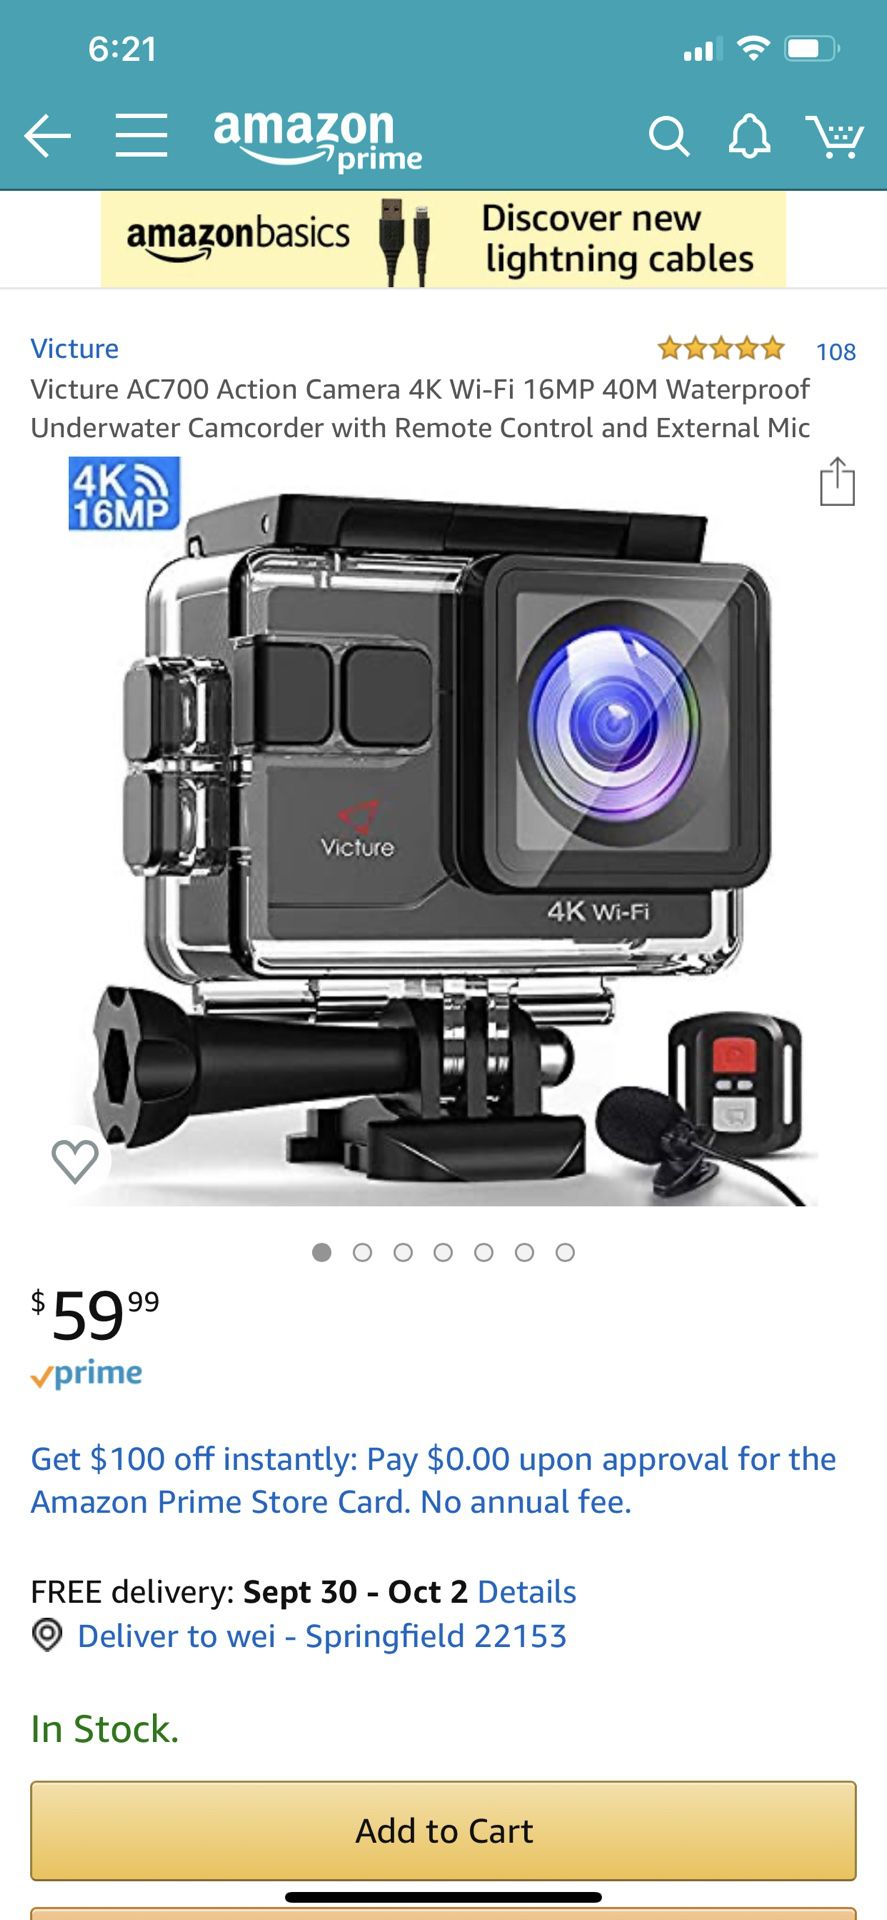 Victure AC700 Action Camera 4K Wi-Fi 16MP 40M Waterproof Underwater Camcorder with Remote Control and External Mic